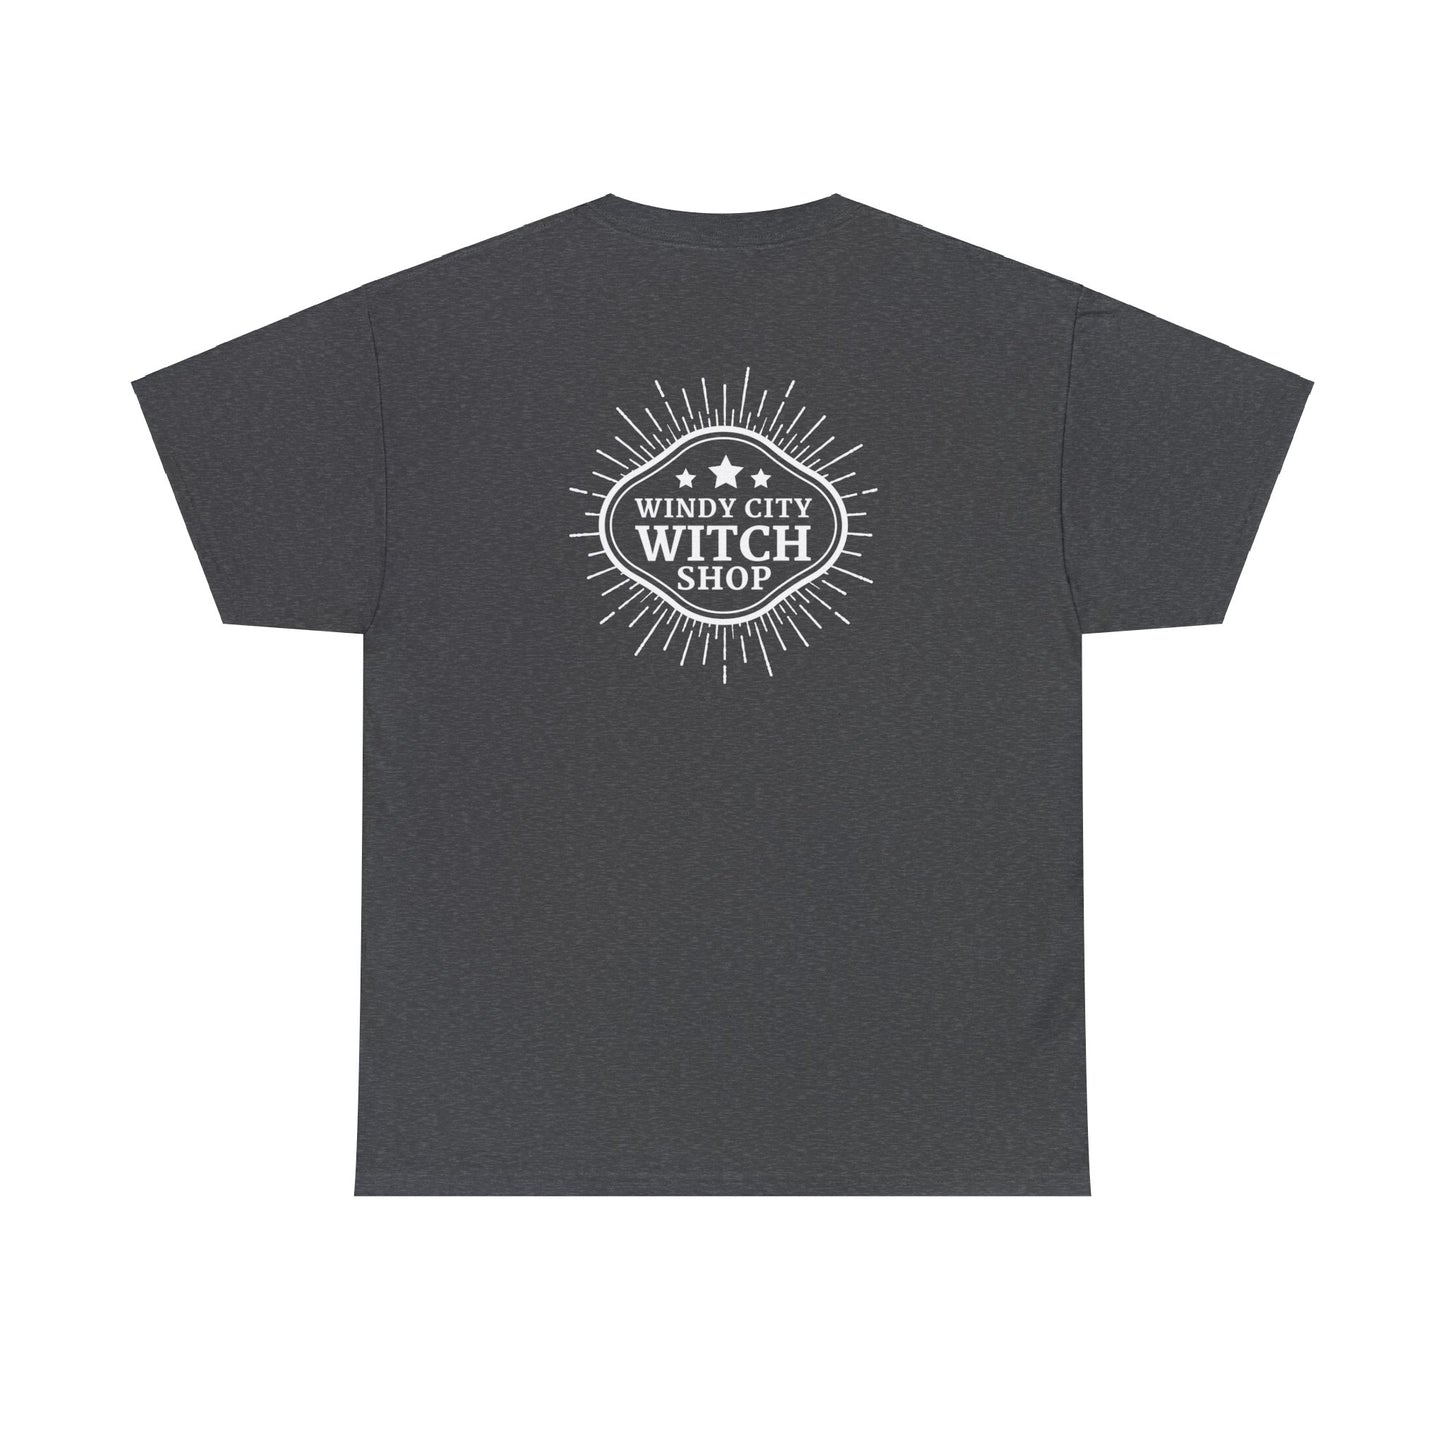 Big Witch Energy cotton t-shirt